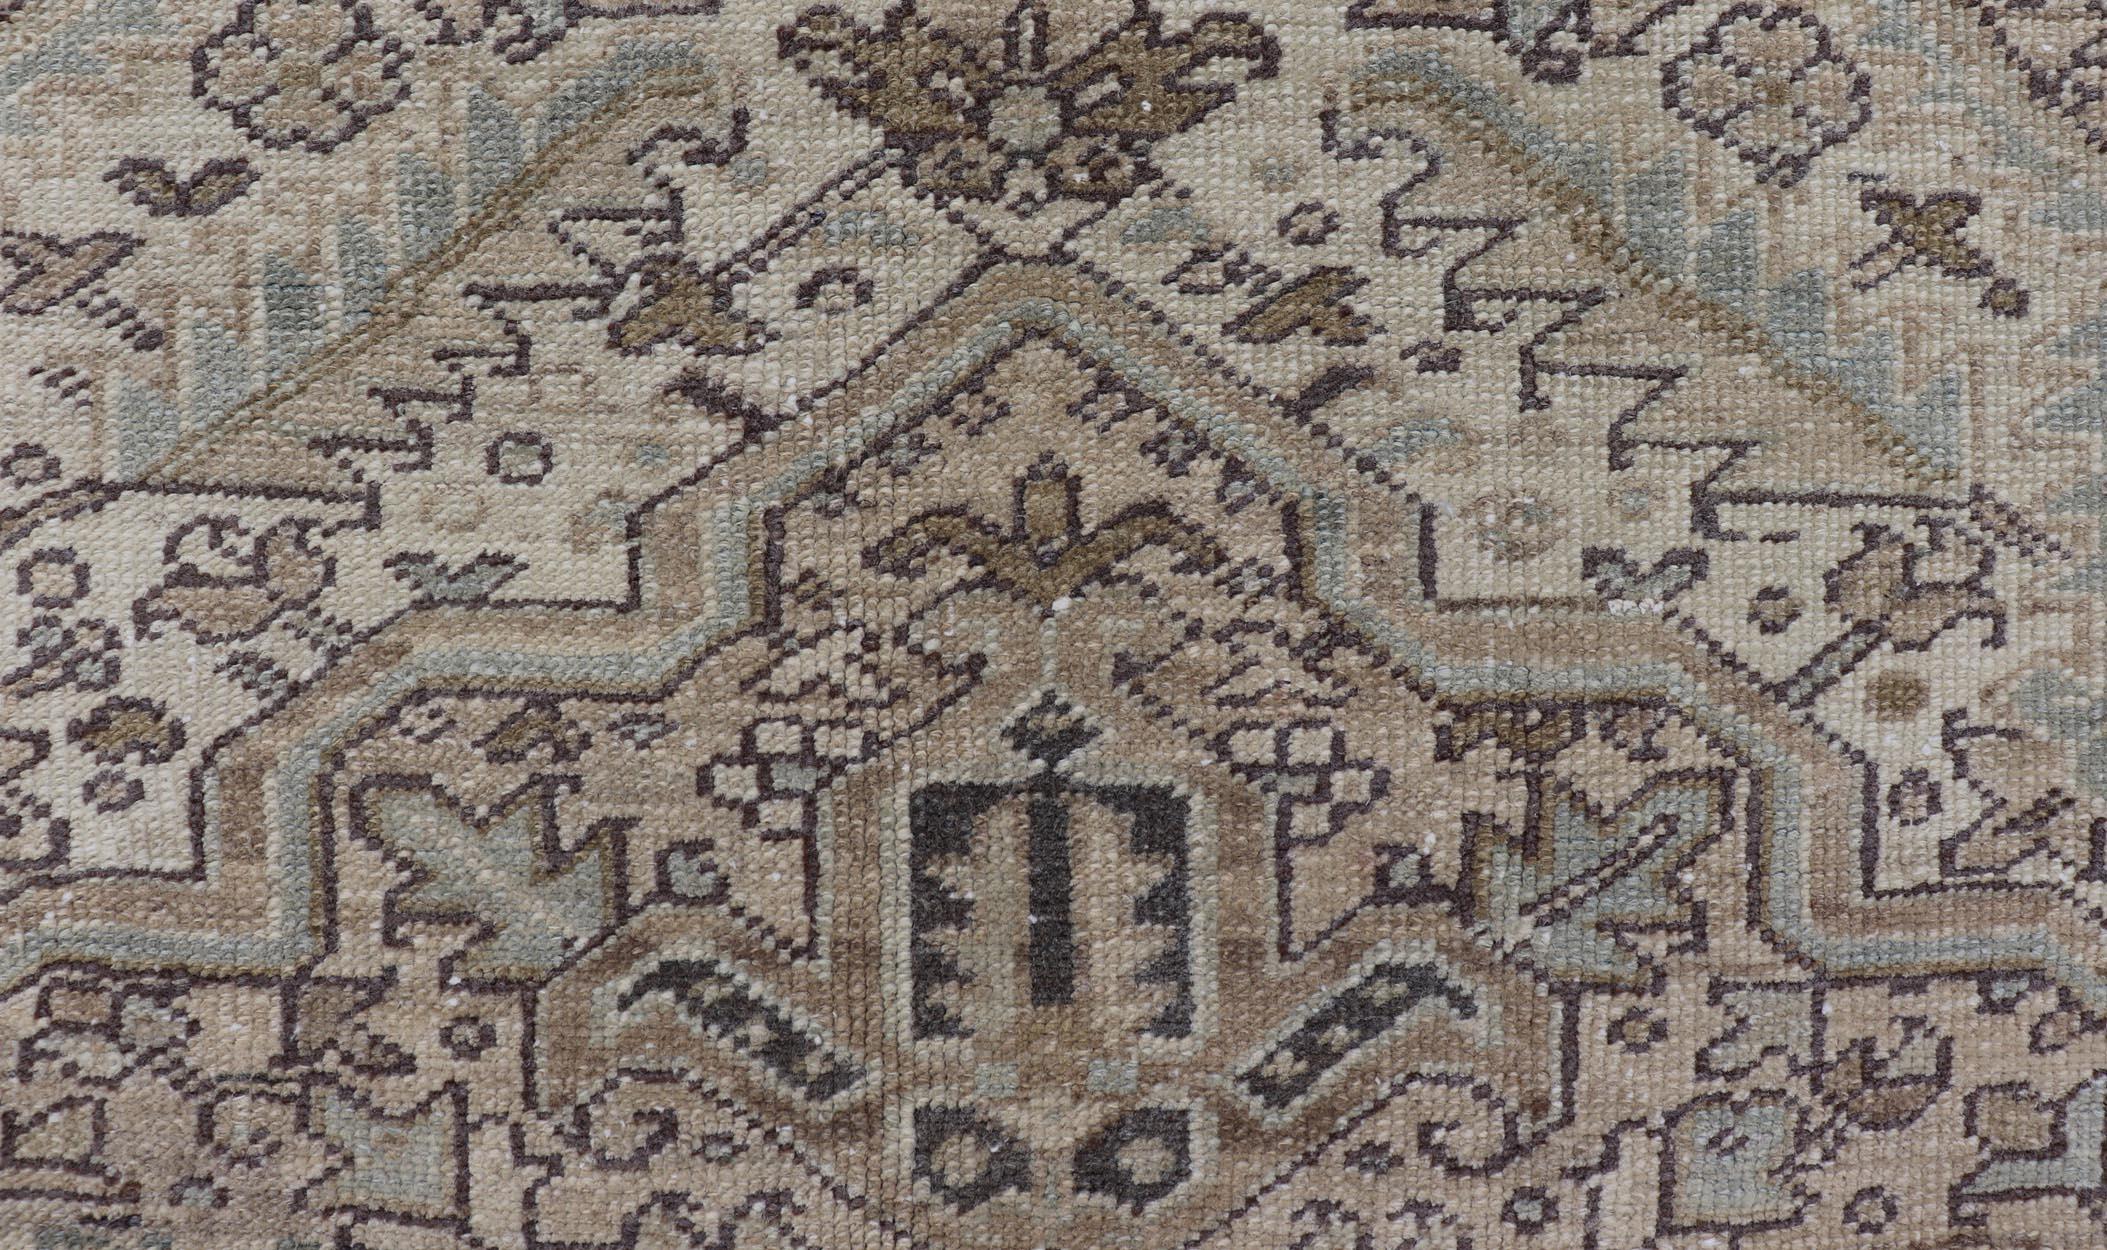 Square Antique Heriz Rug with Geometric Design in Brown, Blue, Tan, Cream For Sale 5